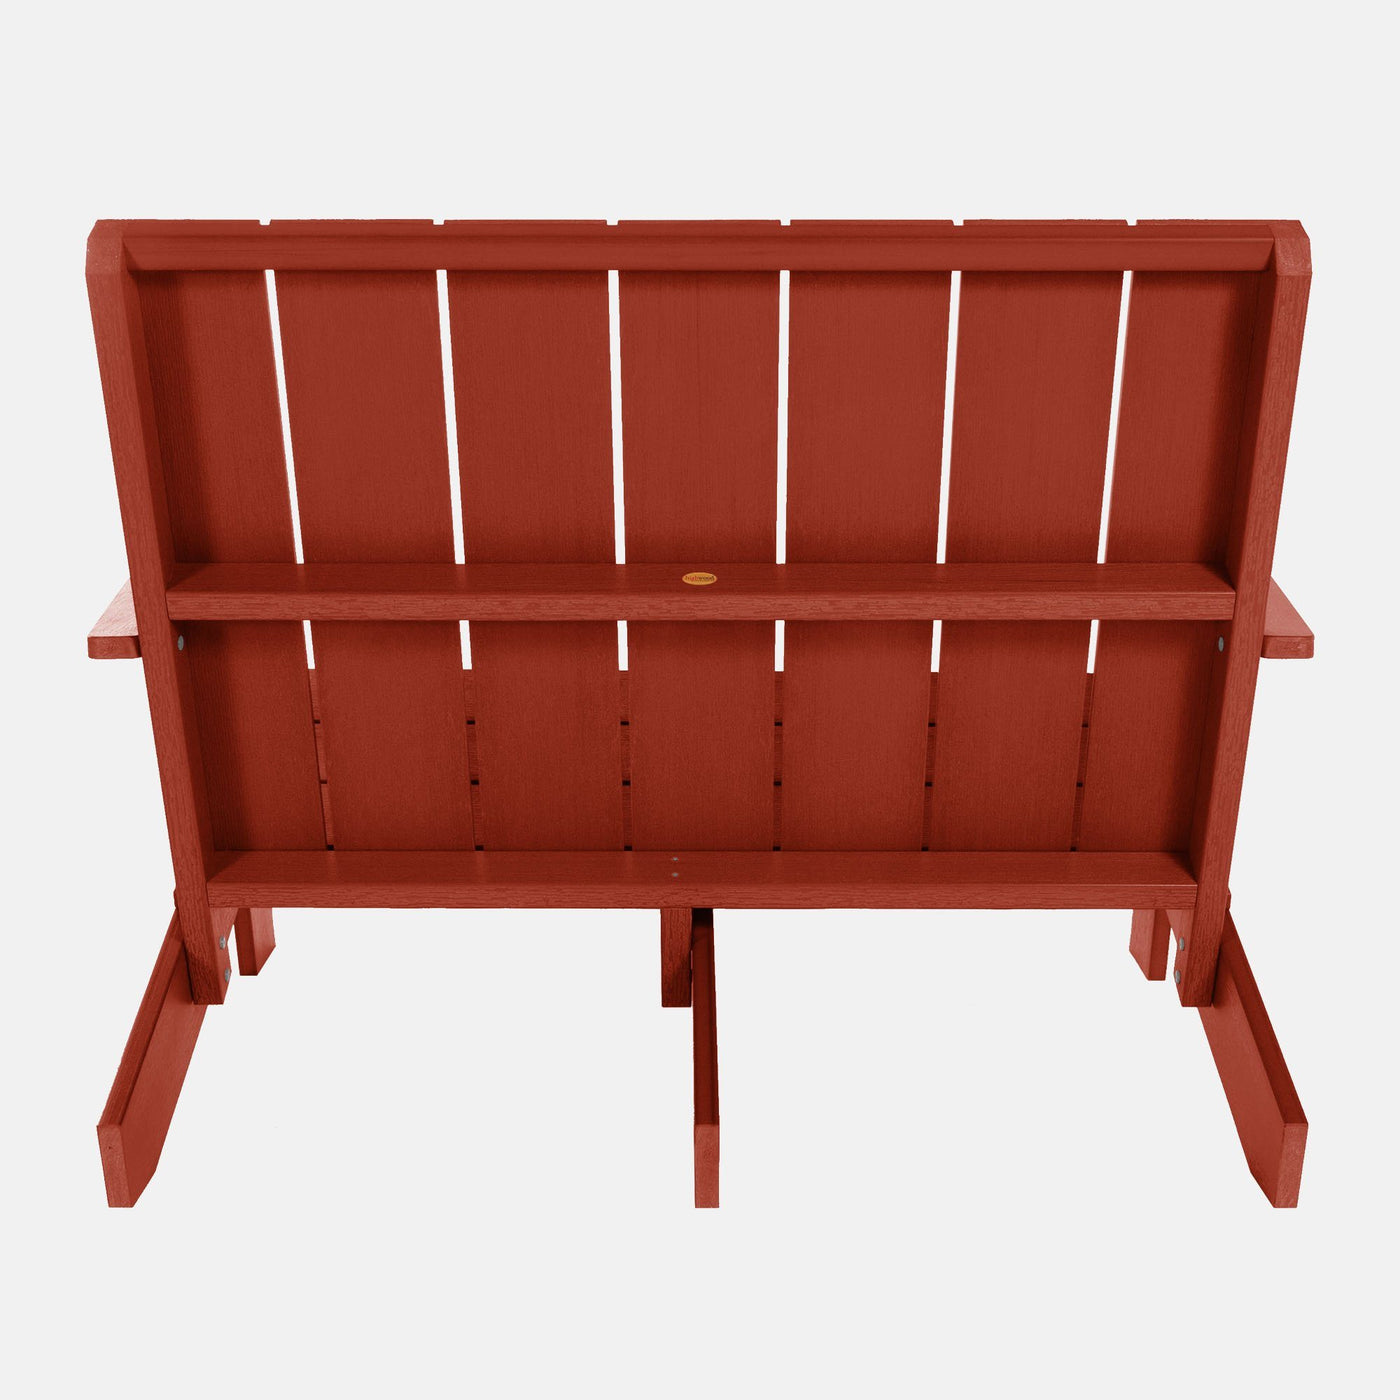 Back view of Italica Modern bench in Rustic Red